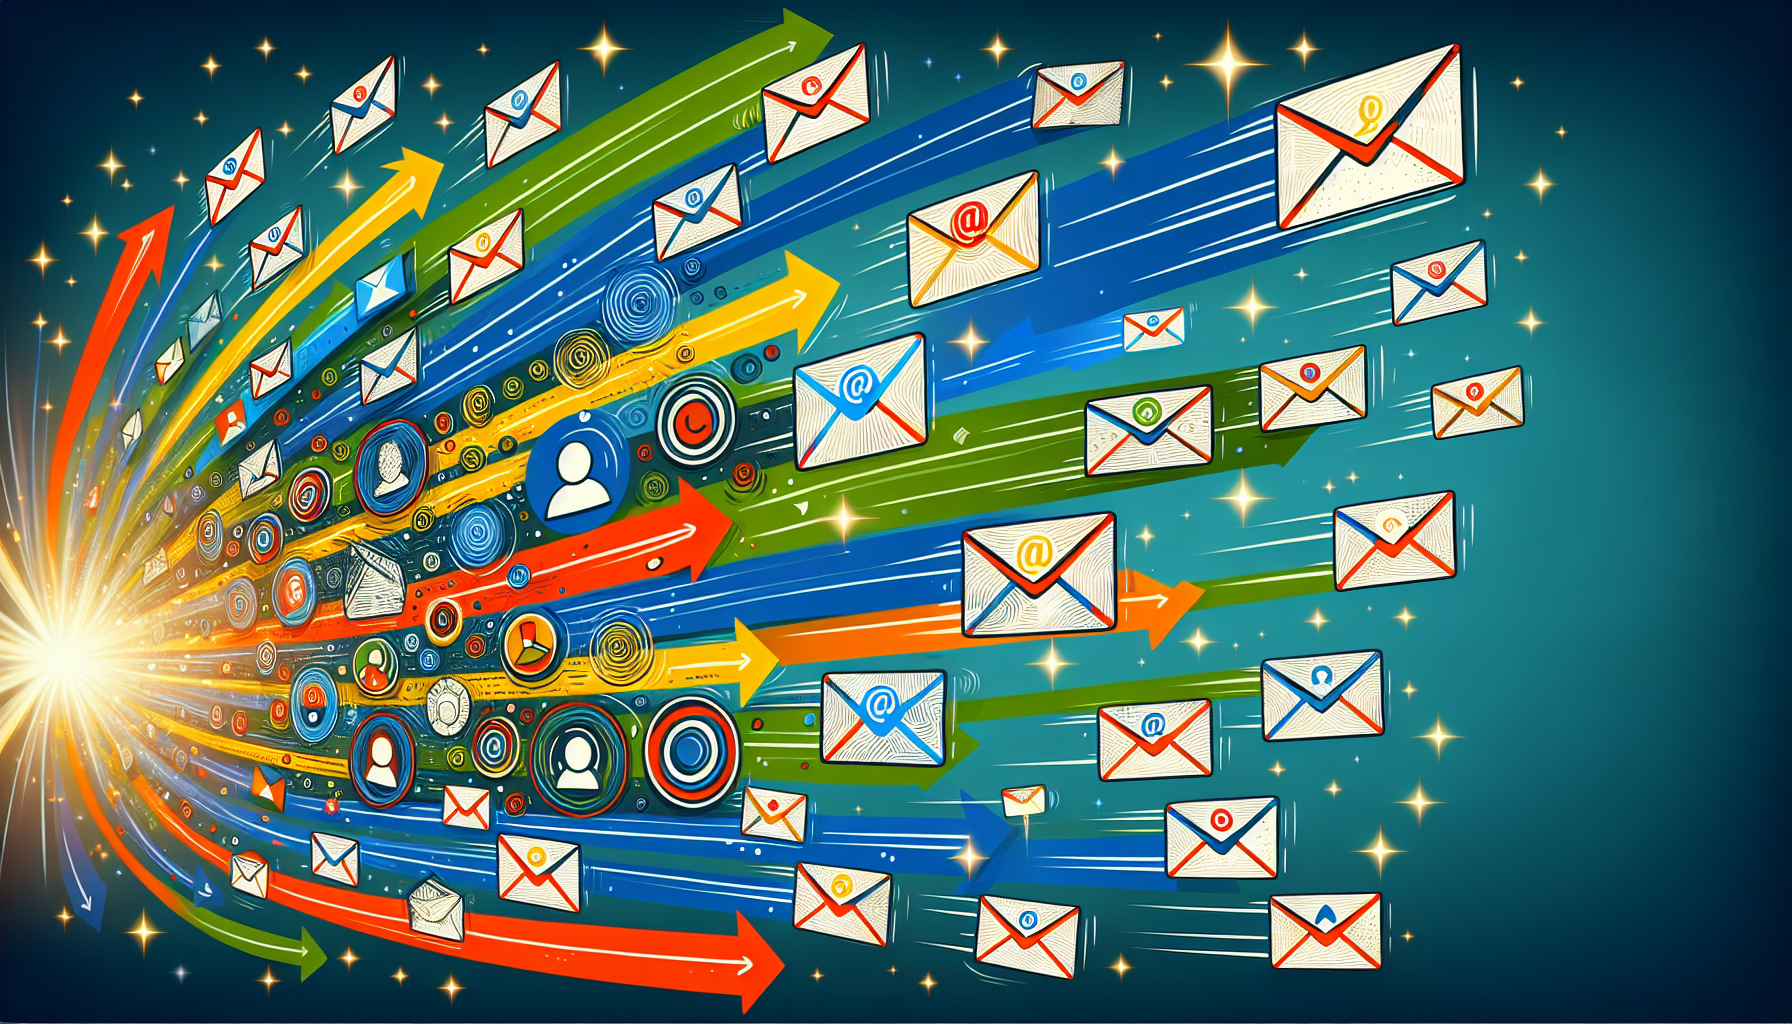 Targeted email campaigns reaching diverse audience groups